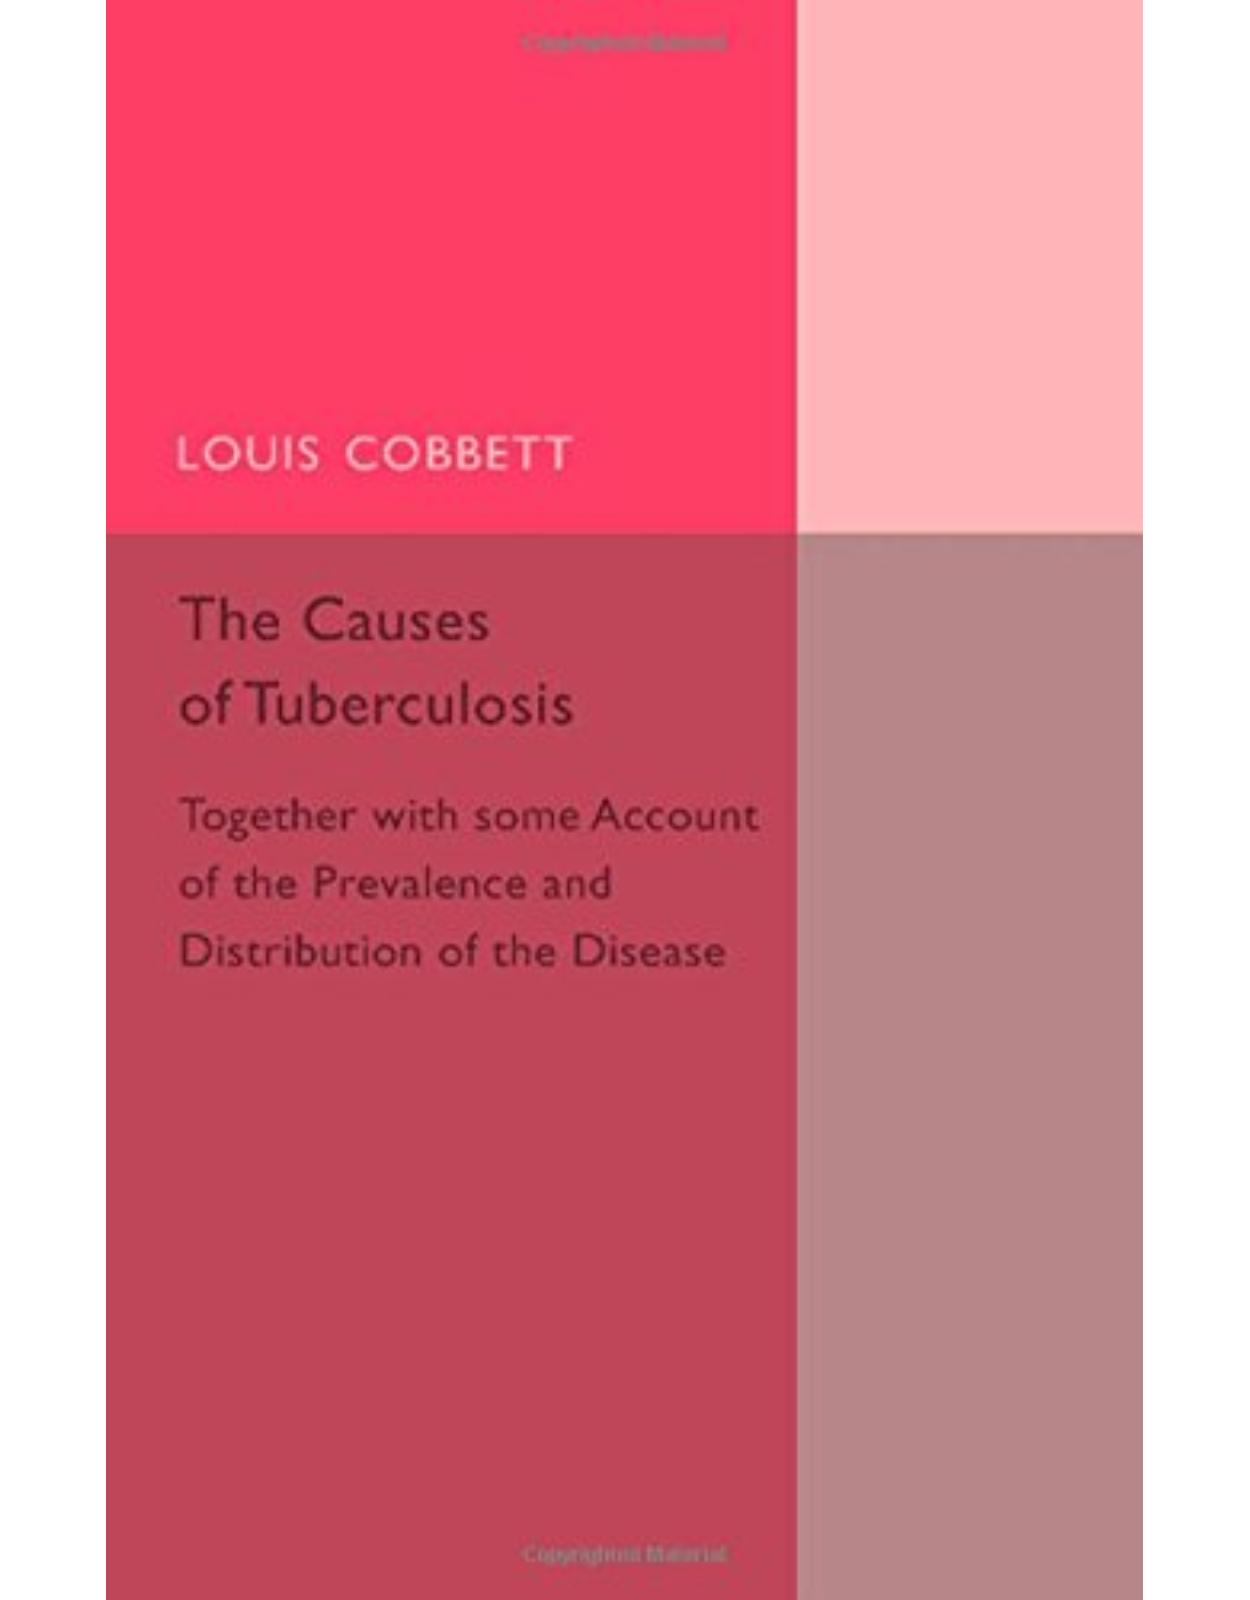 The Causes of Tuberculosis: Together with Some Account of the Prevalence and Distribution of the Disease